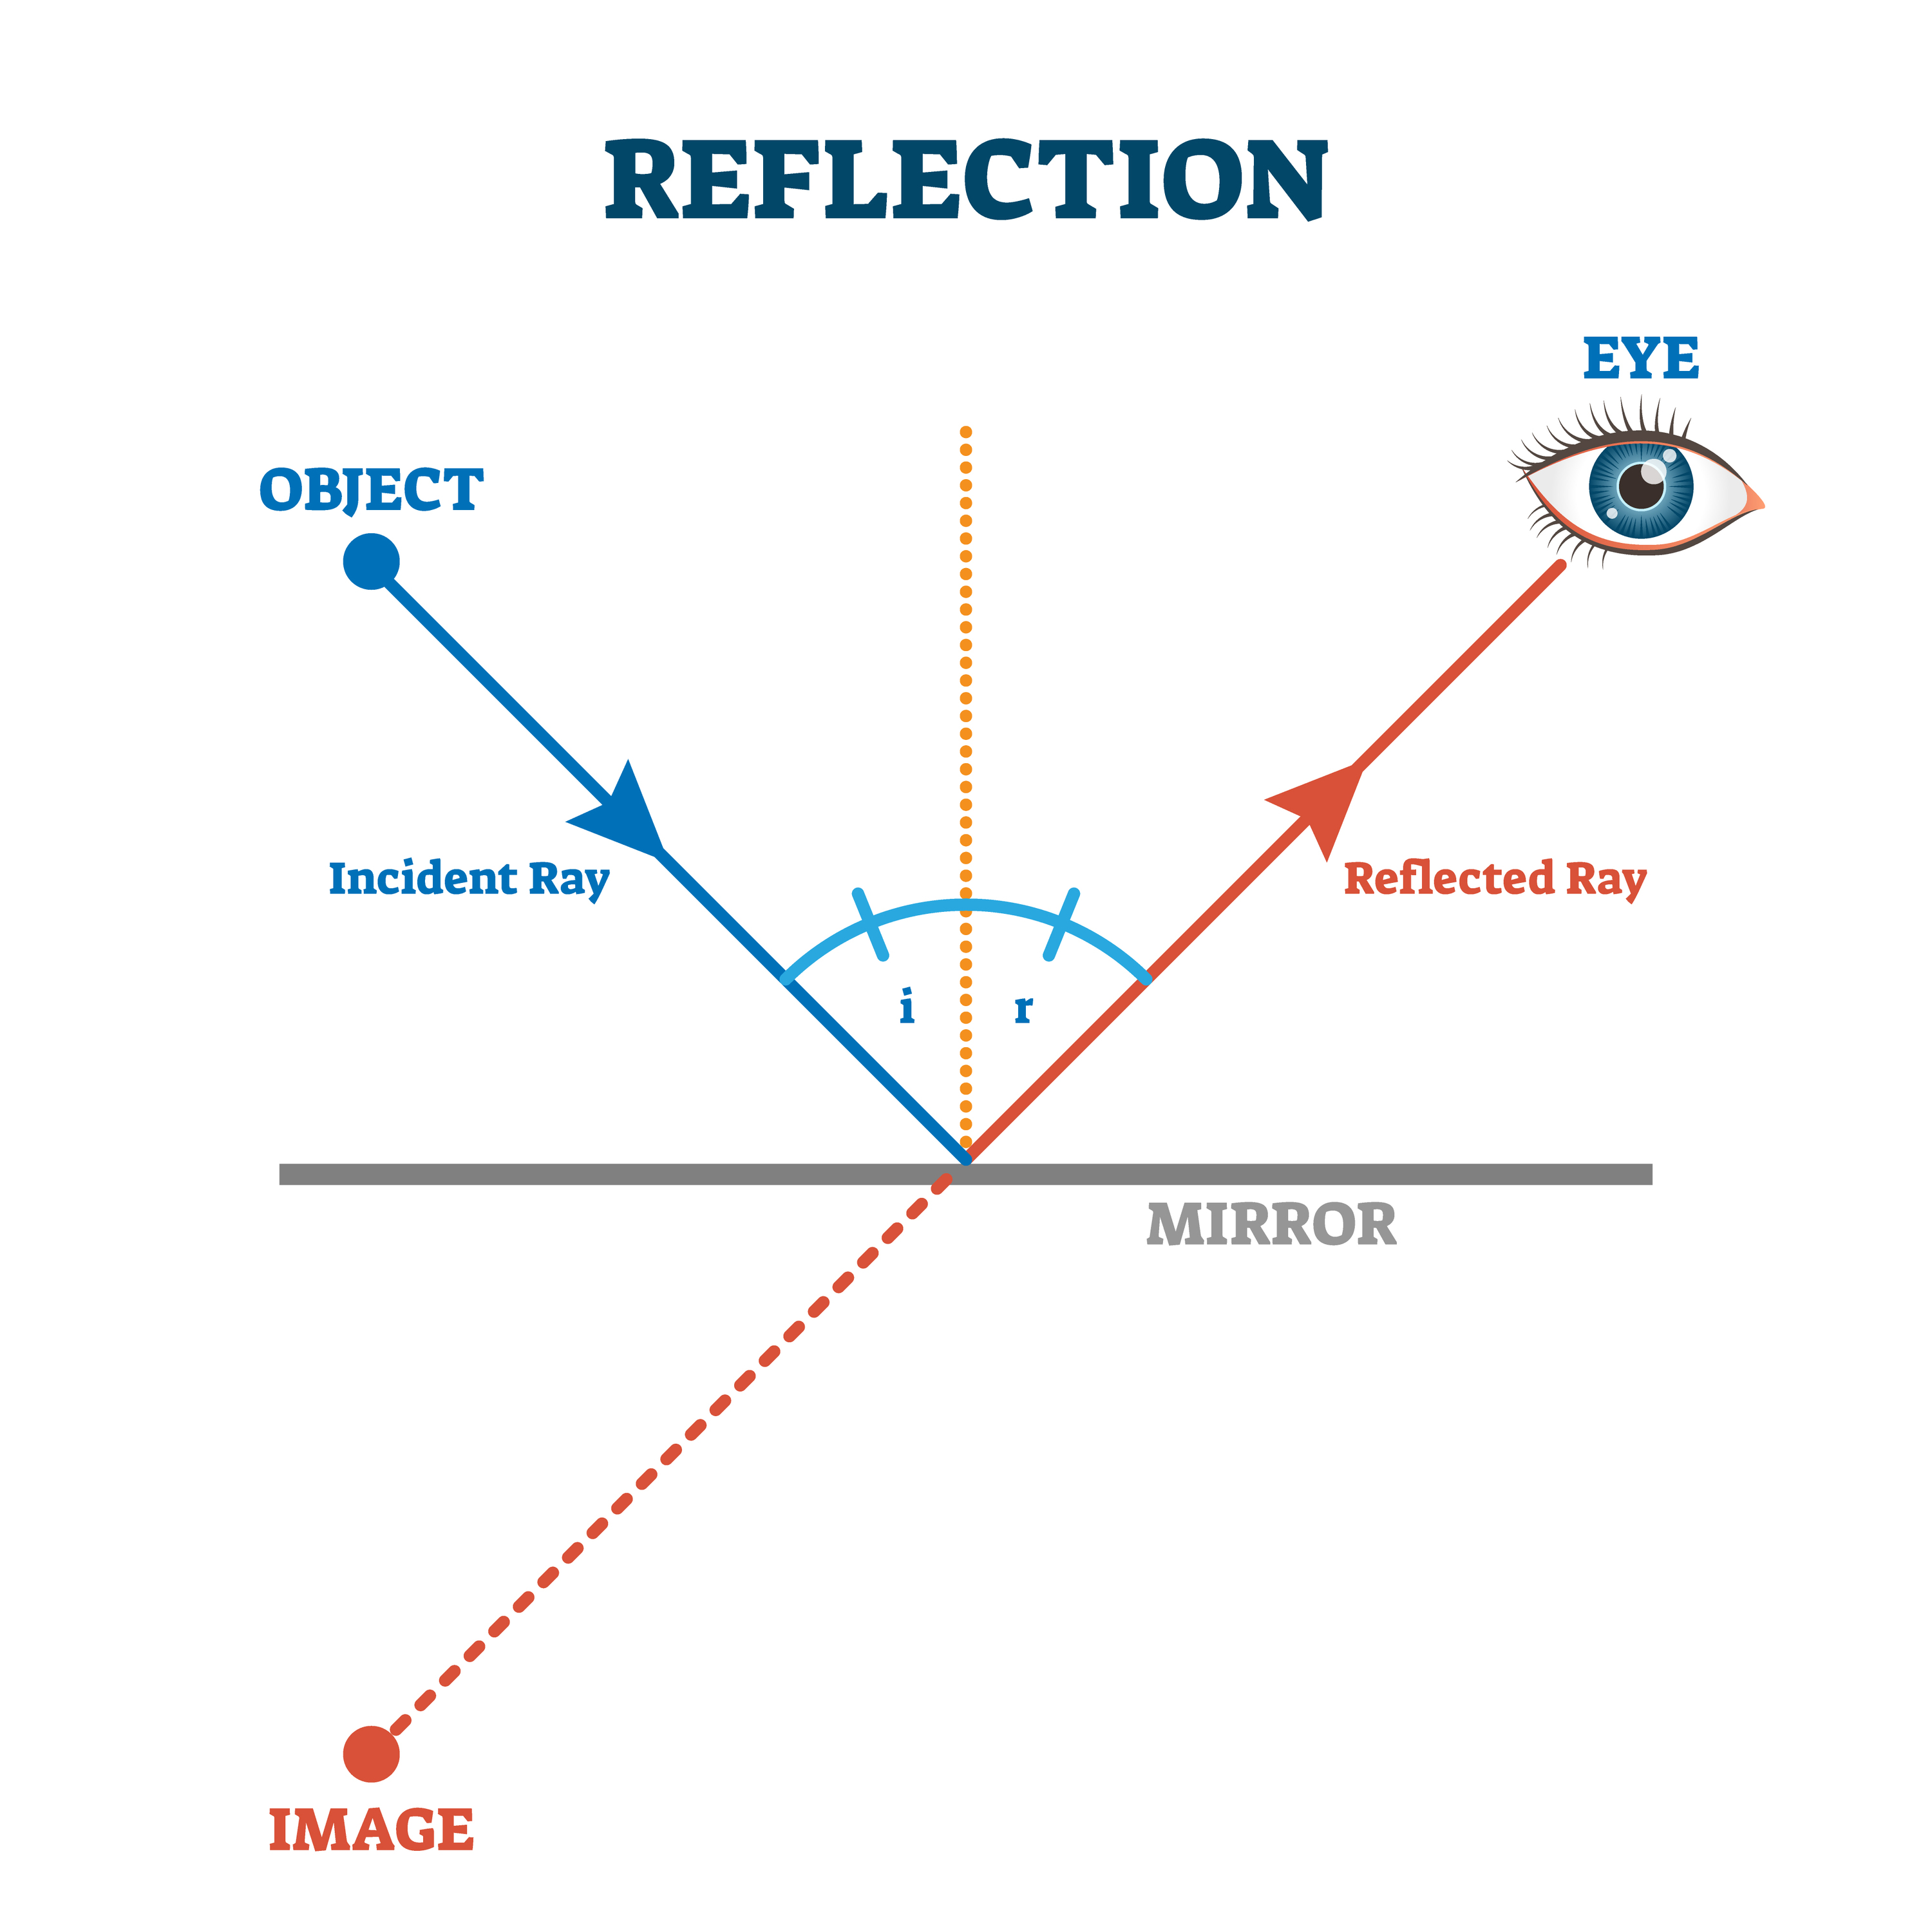 reflection of light examples